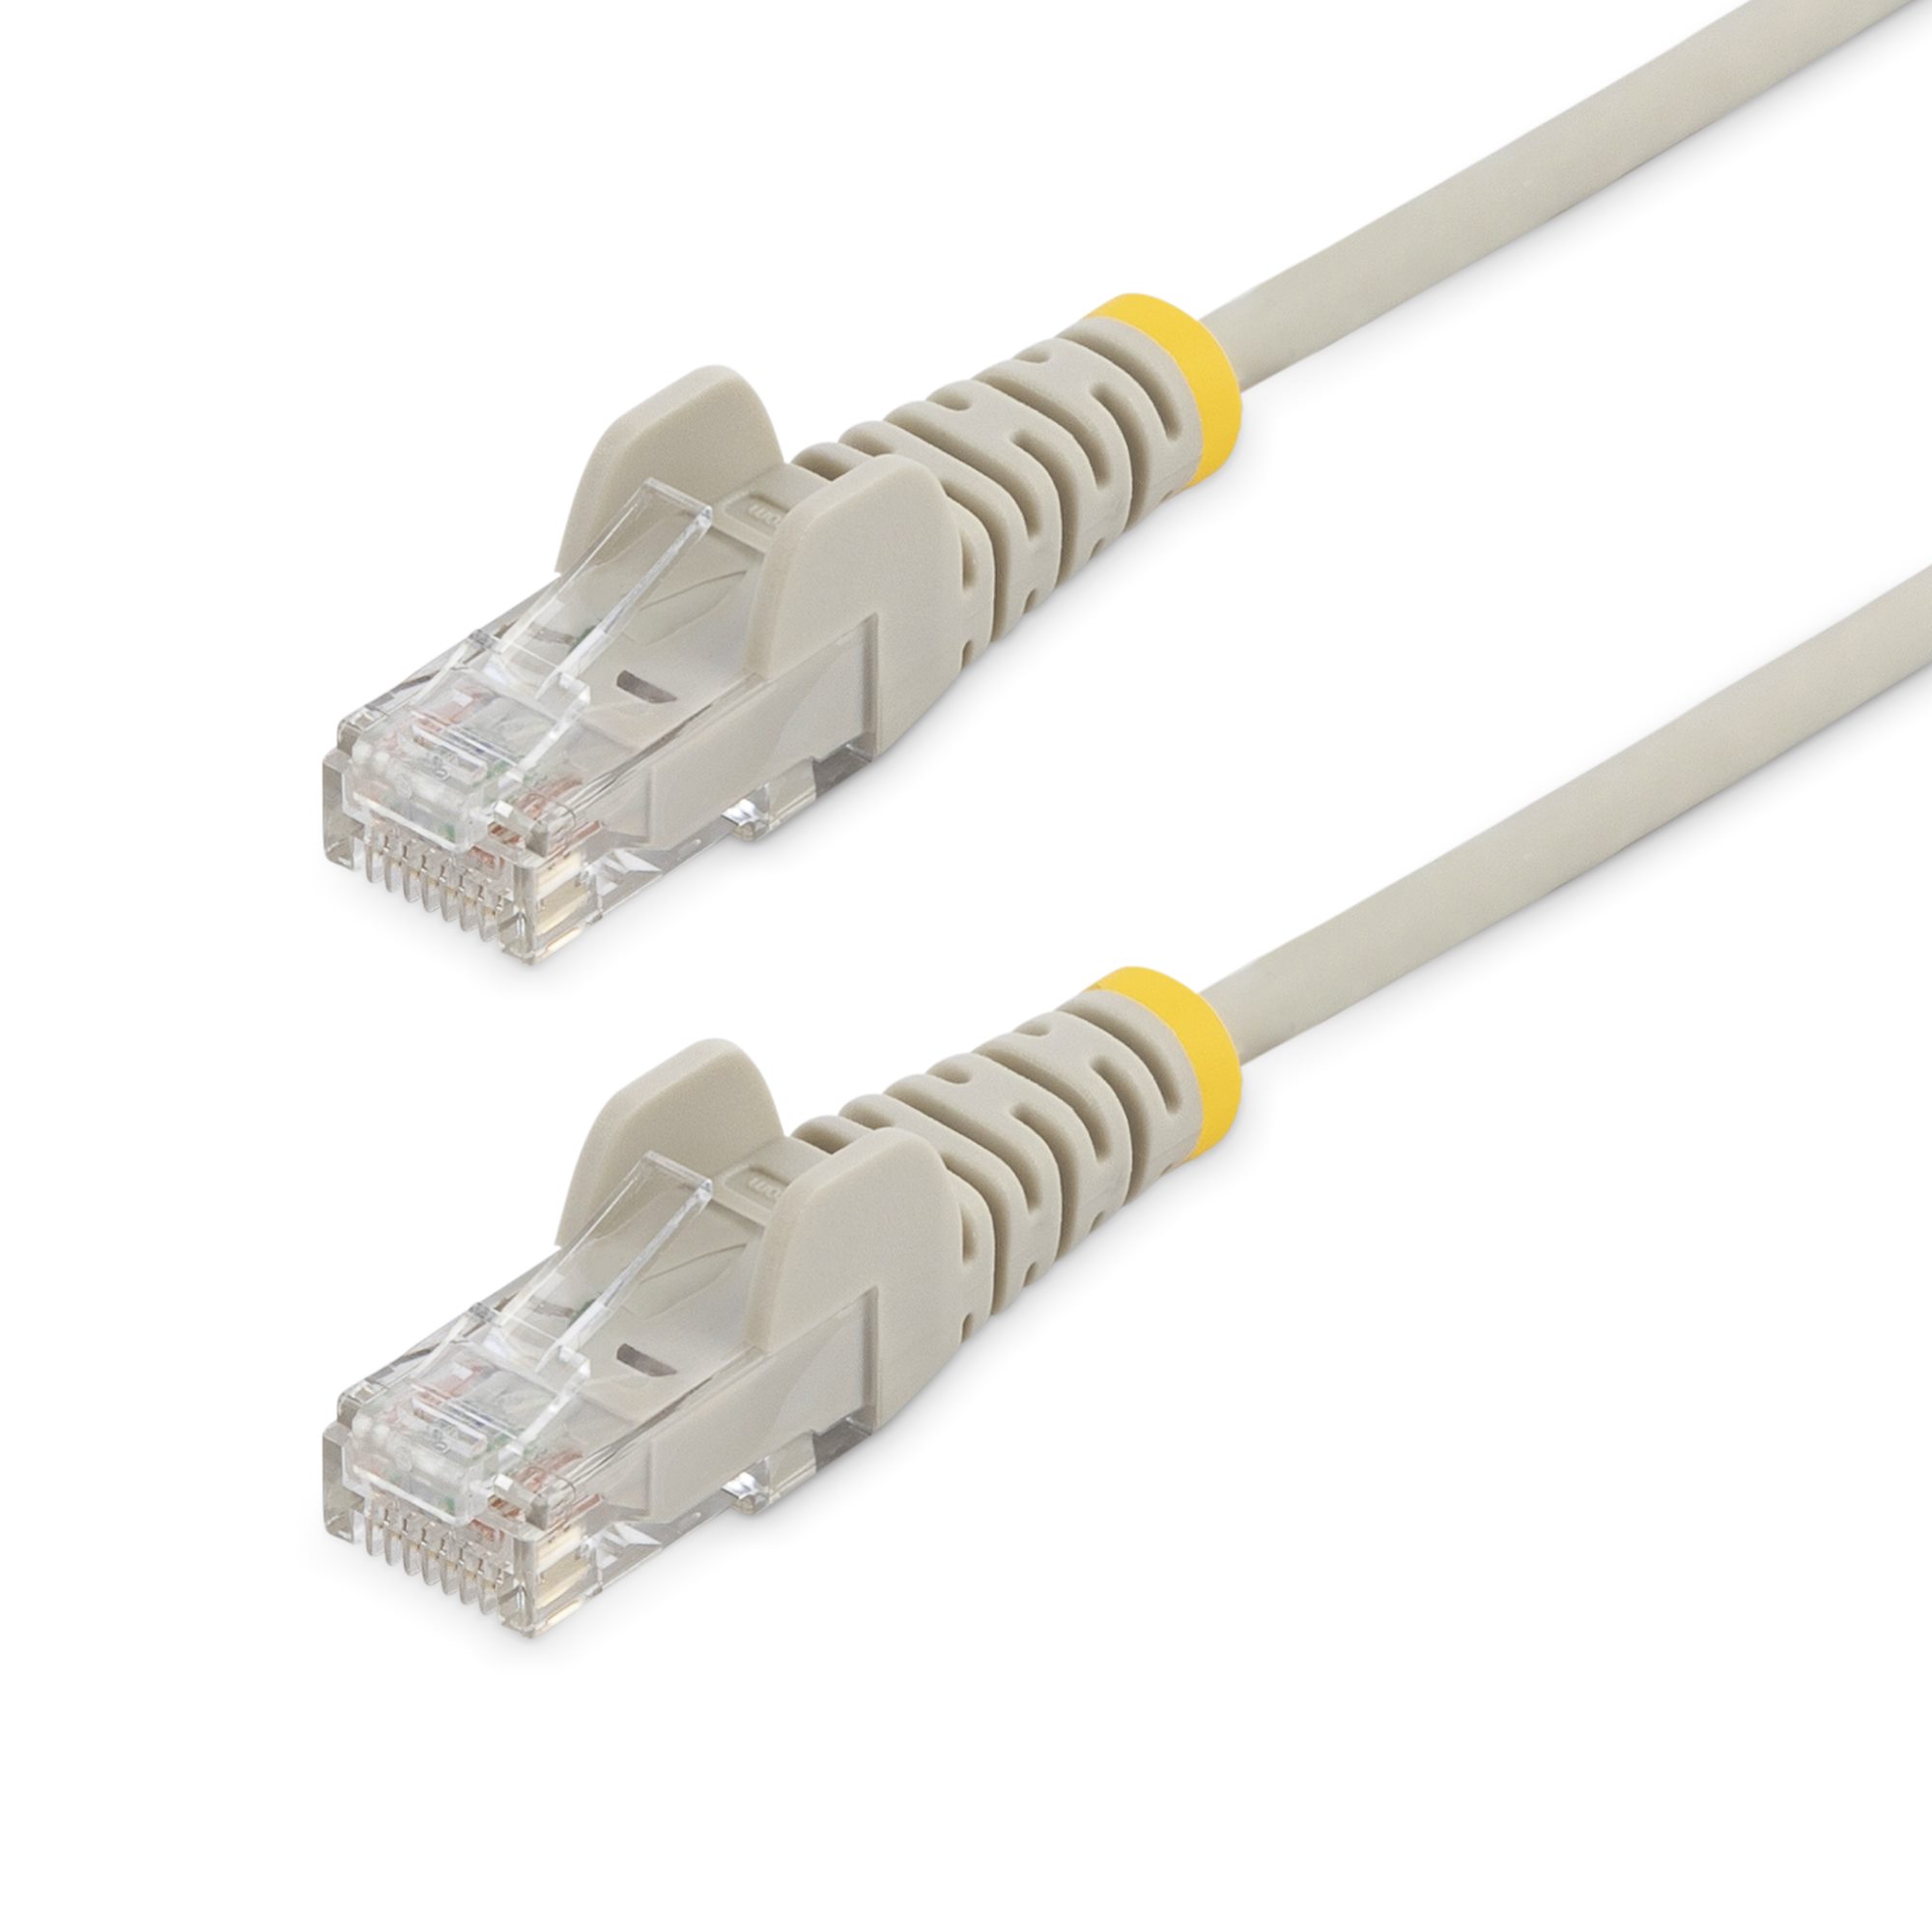 Buy Patch Cable RJ45 S/FTP Cat6 2m Grey (N6SPAT2MGR)